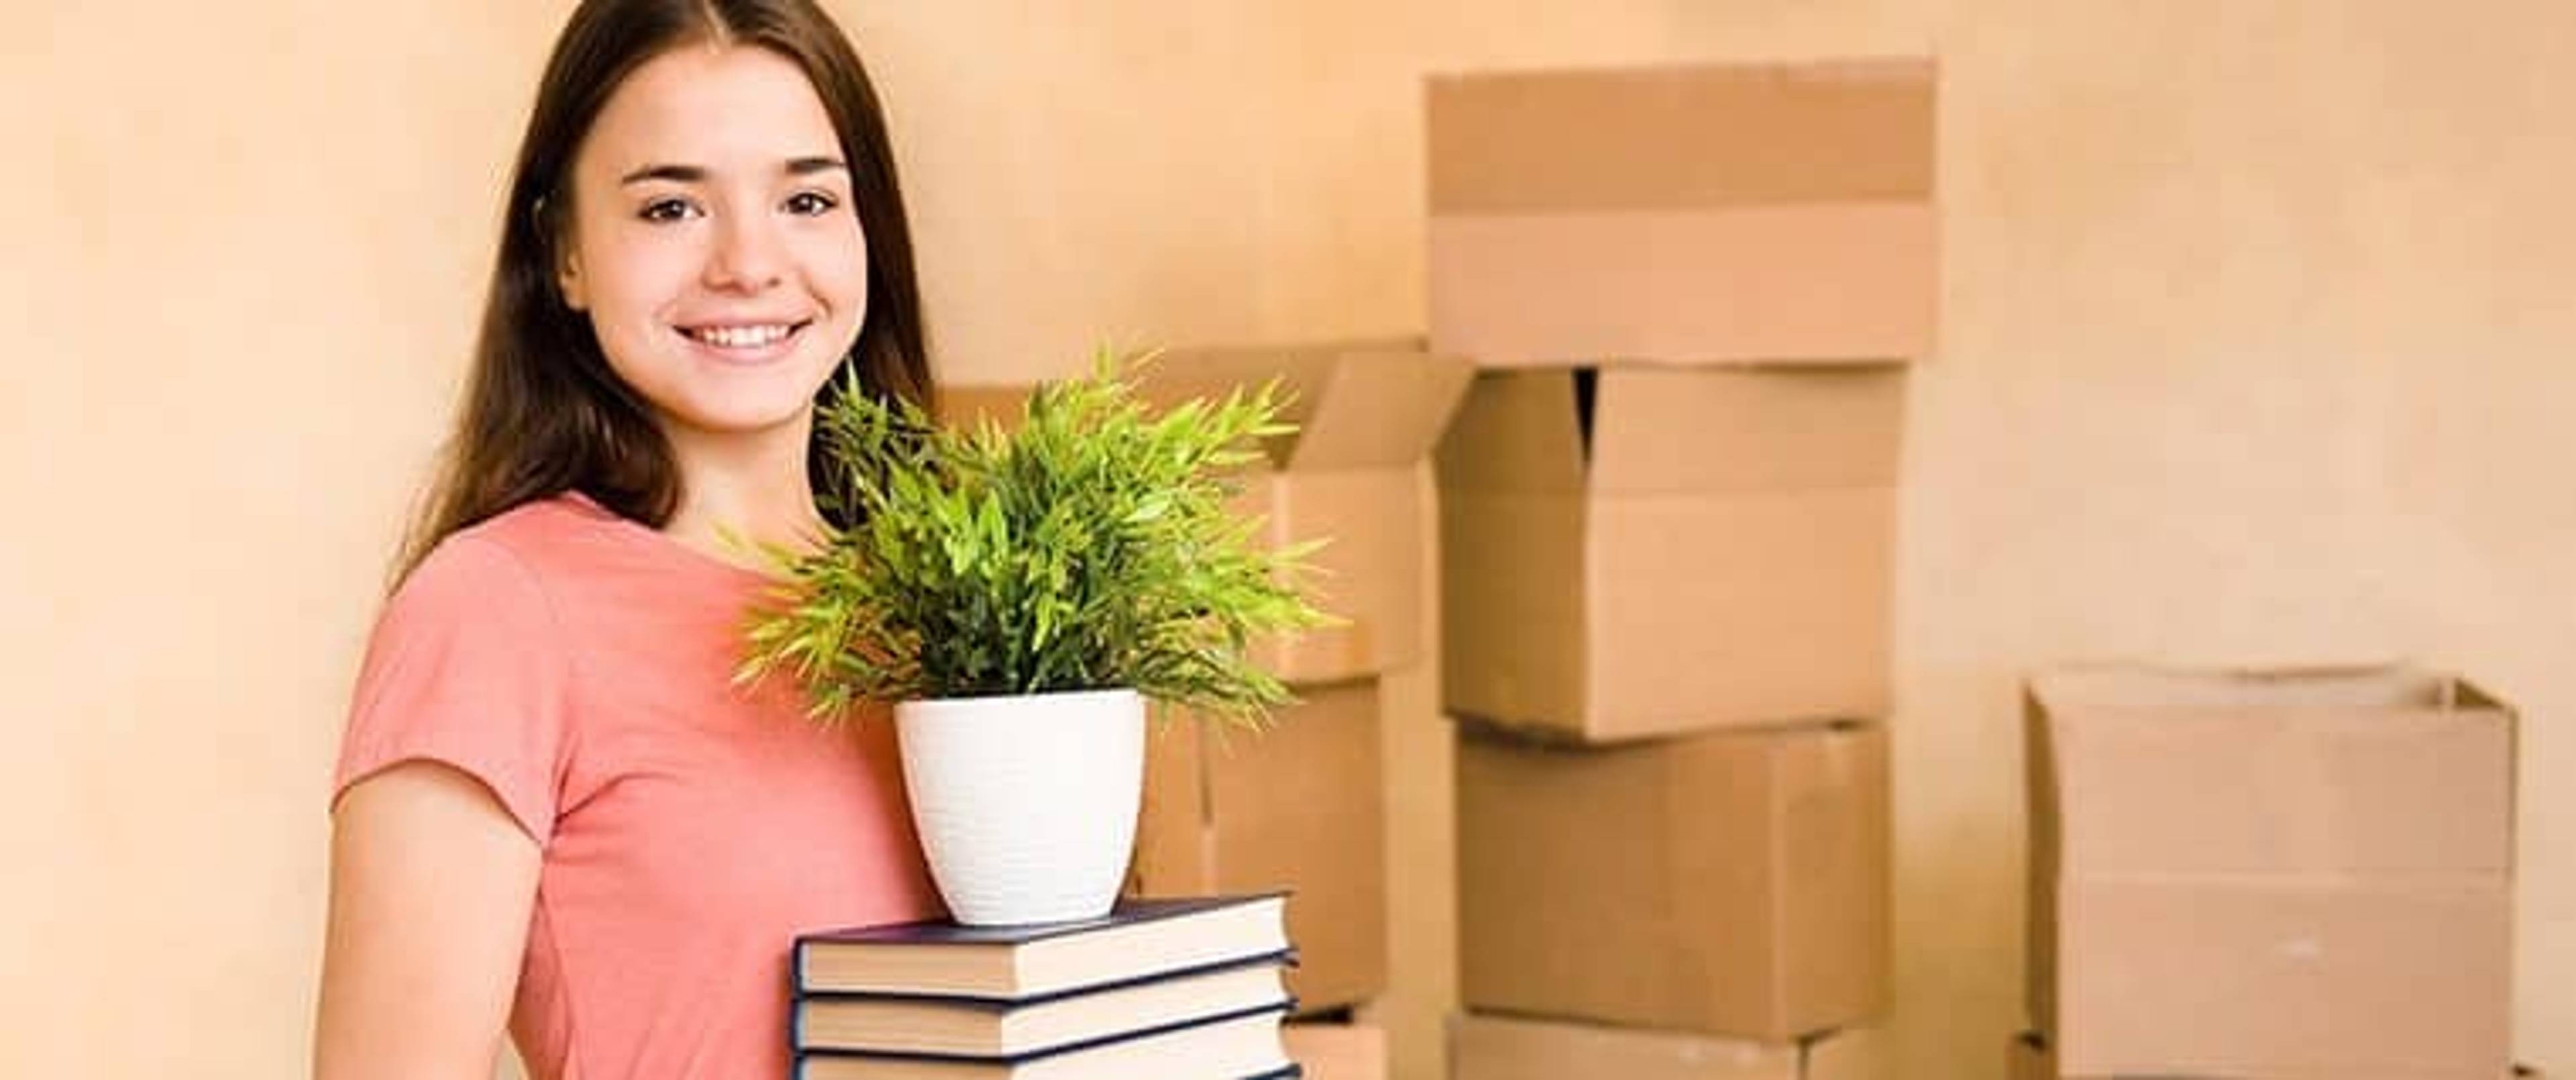 Women holding books and plant with boxes in background